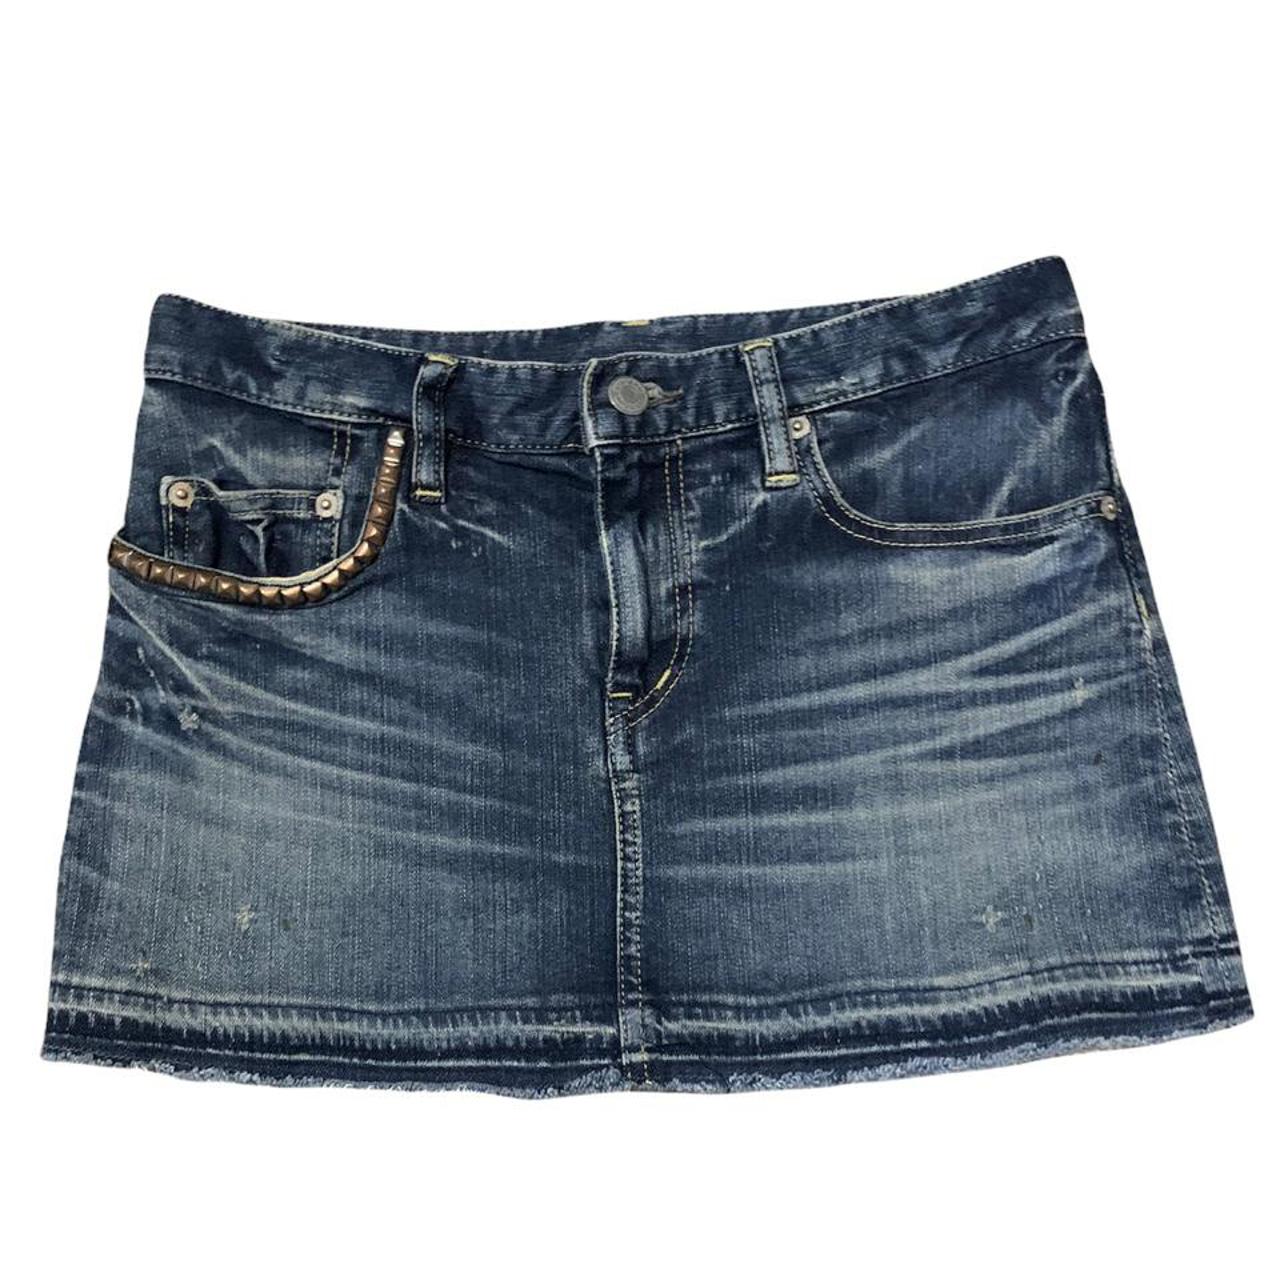 Product Image 1 - Hysteric Glamour Denim Skirt

Good Condition